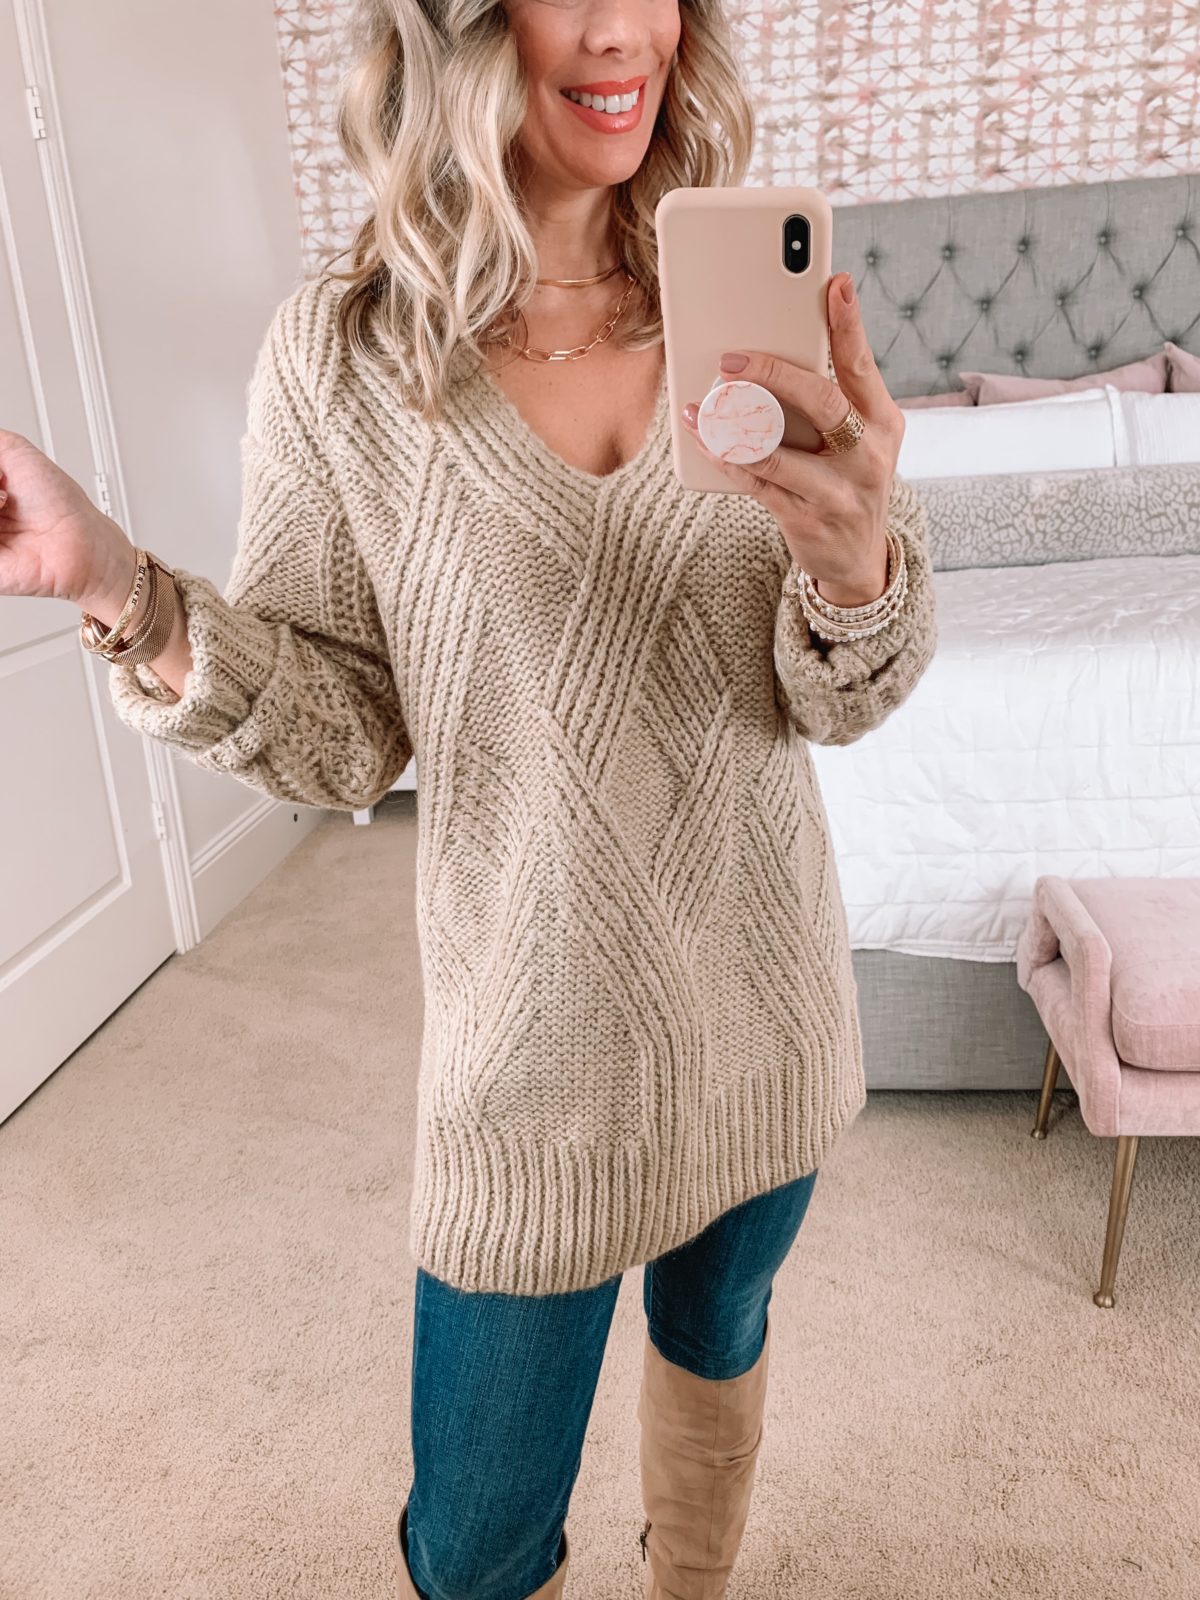 Amazon Fashion Faves, Cable Knit Sweater, Jeans, Boots 